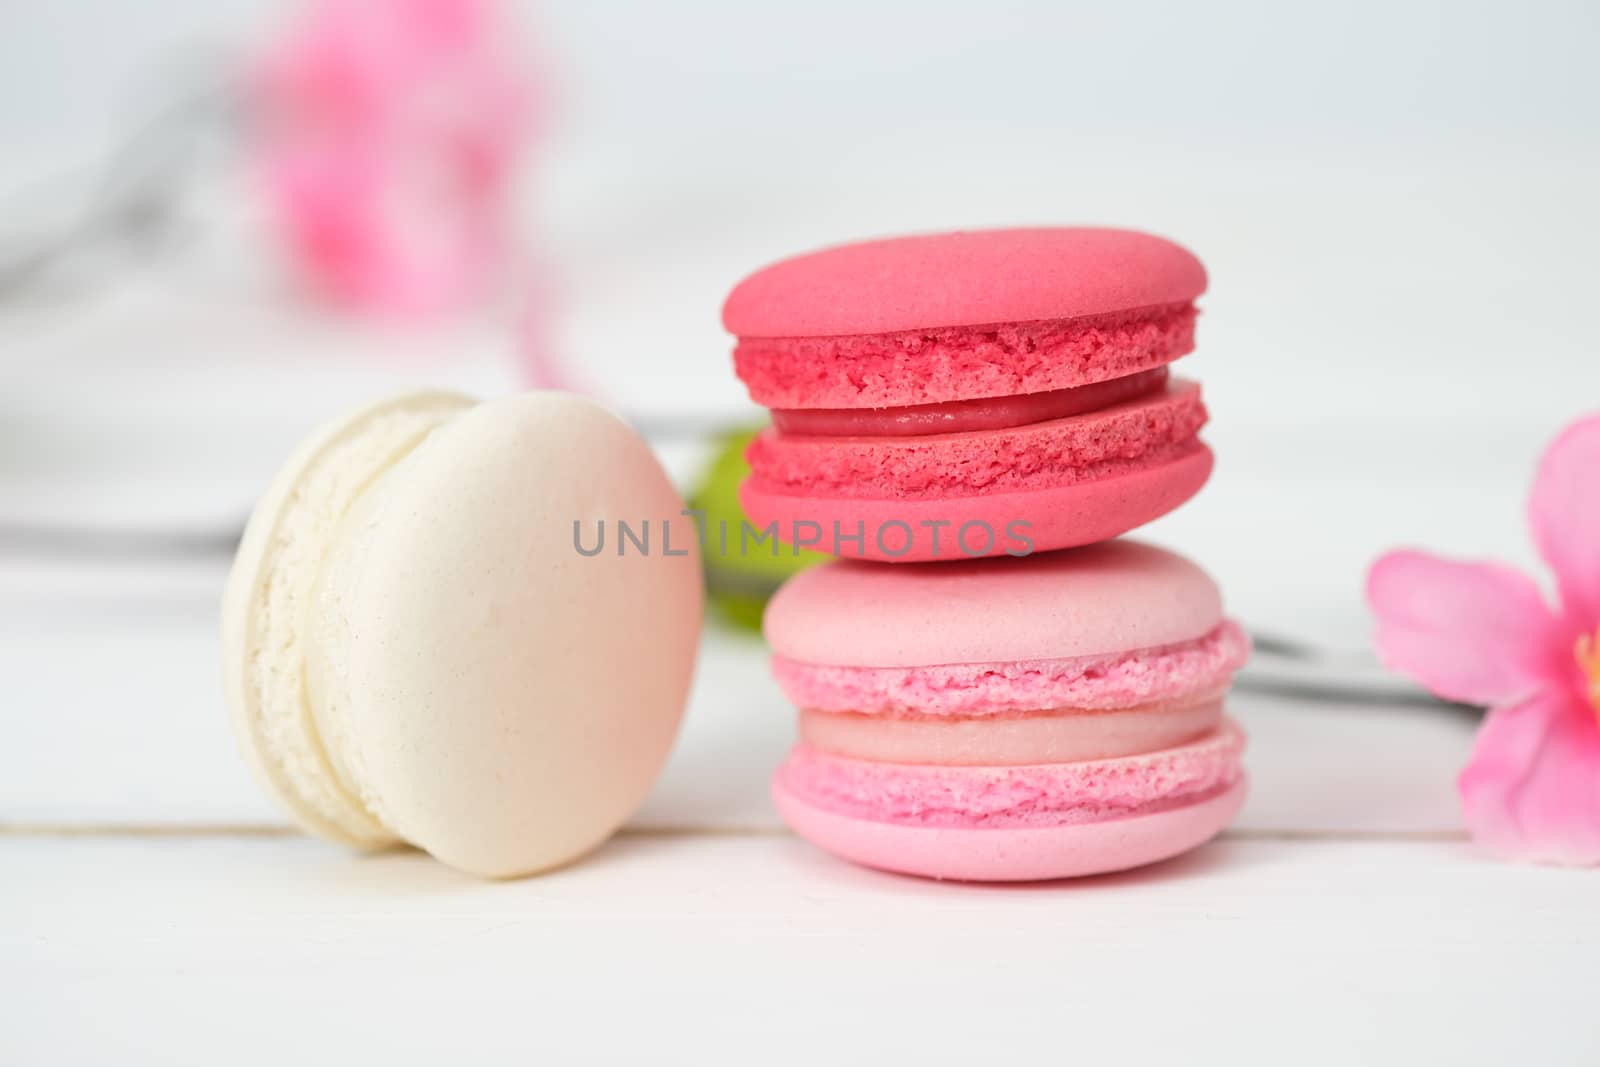 Macaroons and flowers on the white wooden background.